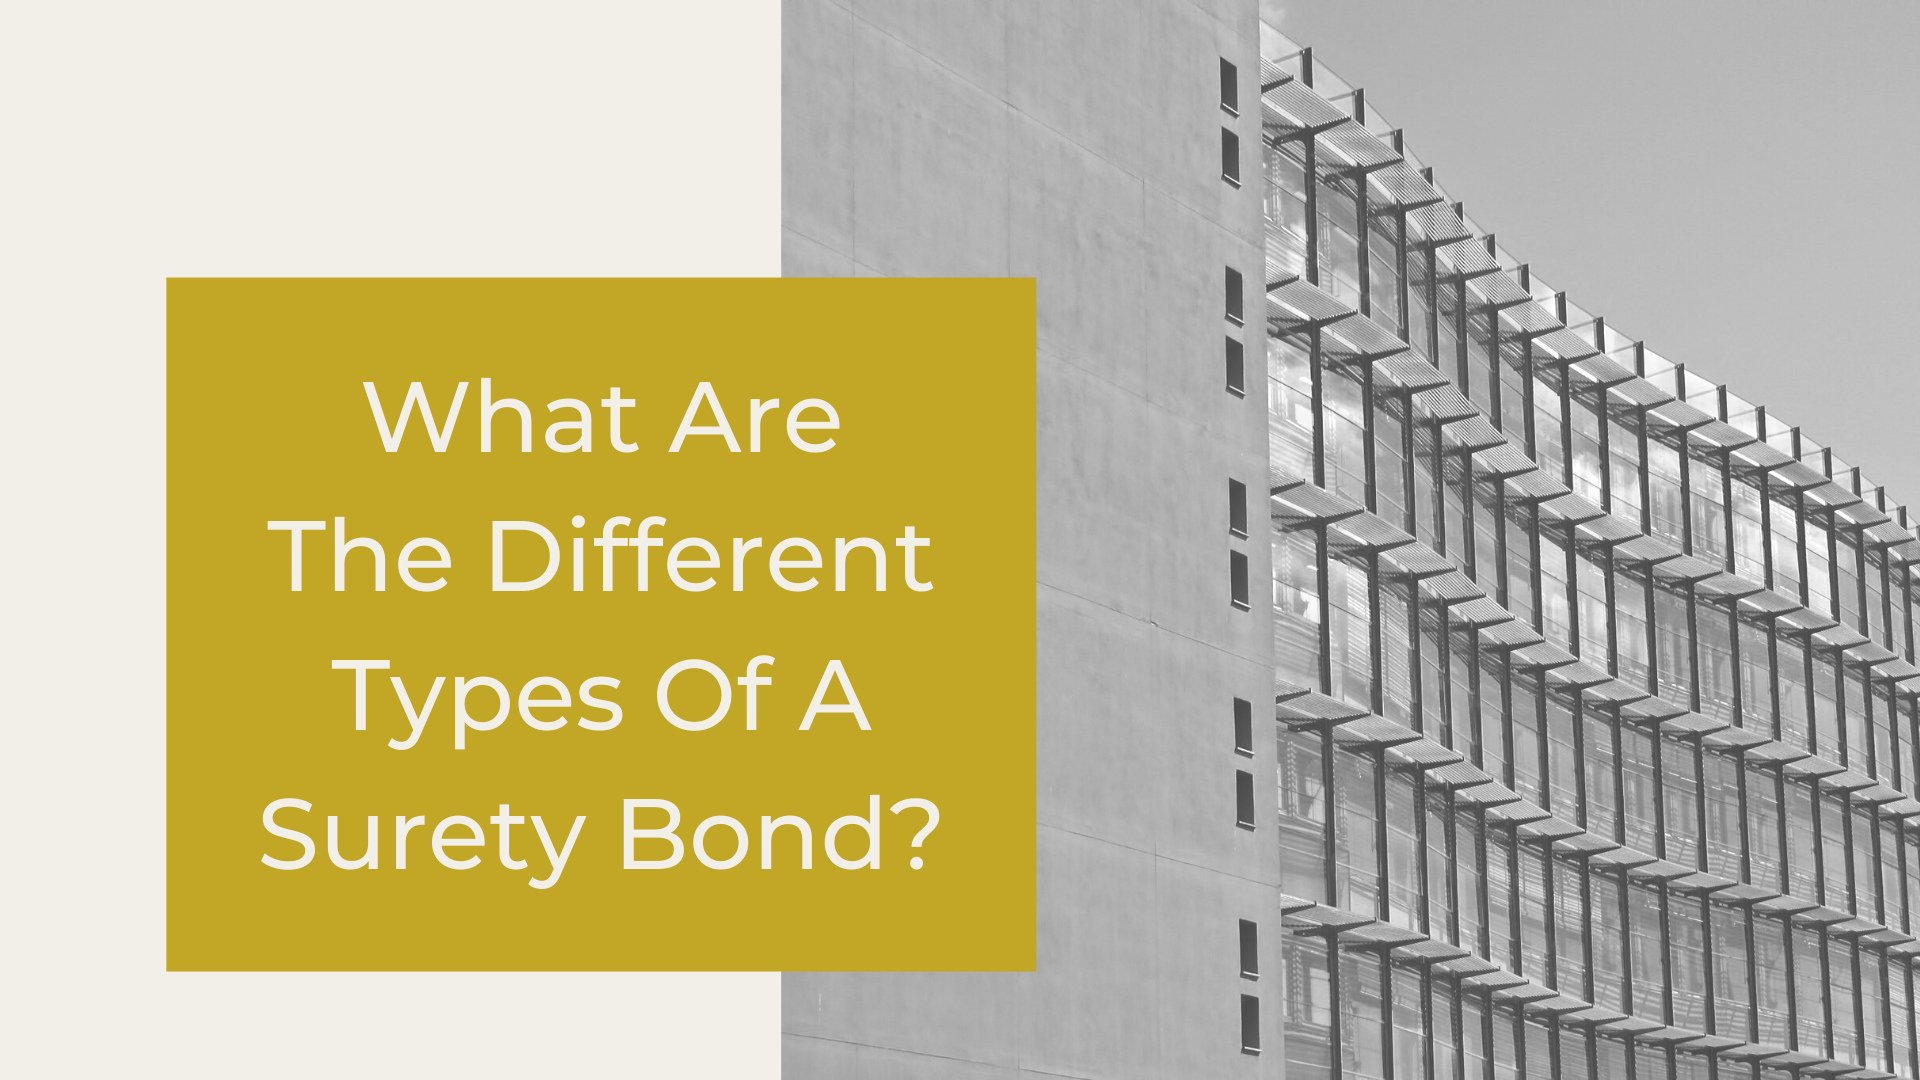 surety bond - What are the different types of a surety bond - building